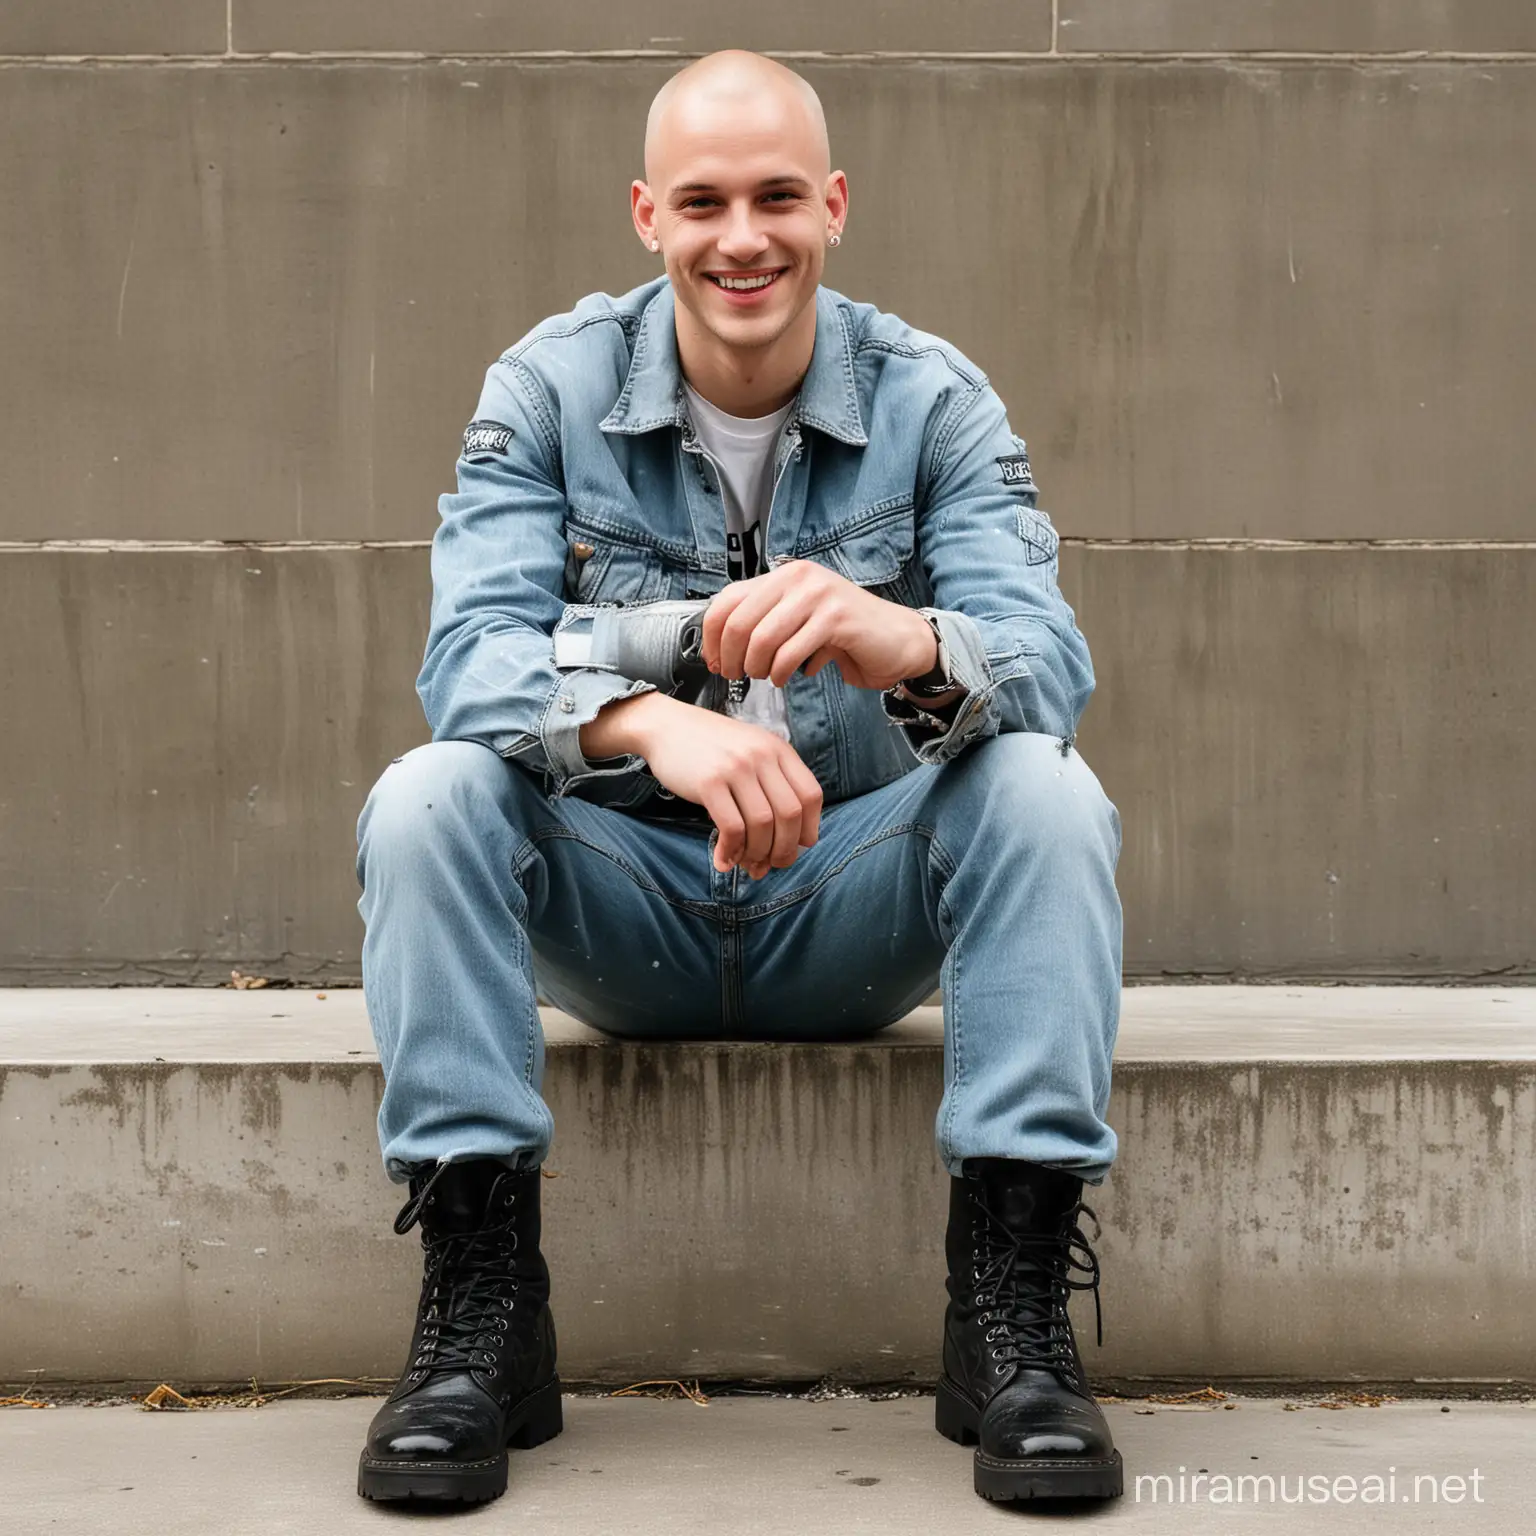 Close up view. Male aged 25. Sitting on a concrete step. Sinister smile. Hands clasped together. Head totally shaved bald. Light Blue Jeans covered with splashes of bleach, turned up just below the knee. 12 inch high Black combat boots. Boots laced up with white laces in a ladder style. Olive green coloured shiny Alpha bomber jacket.